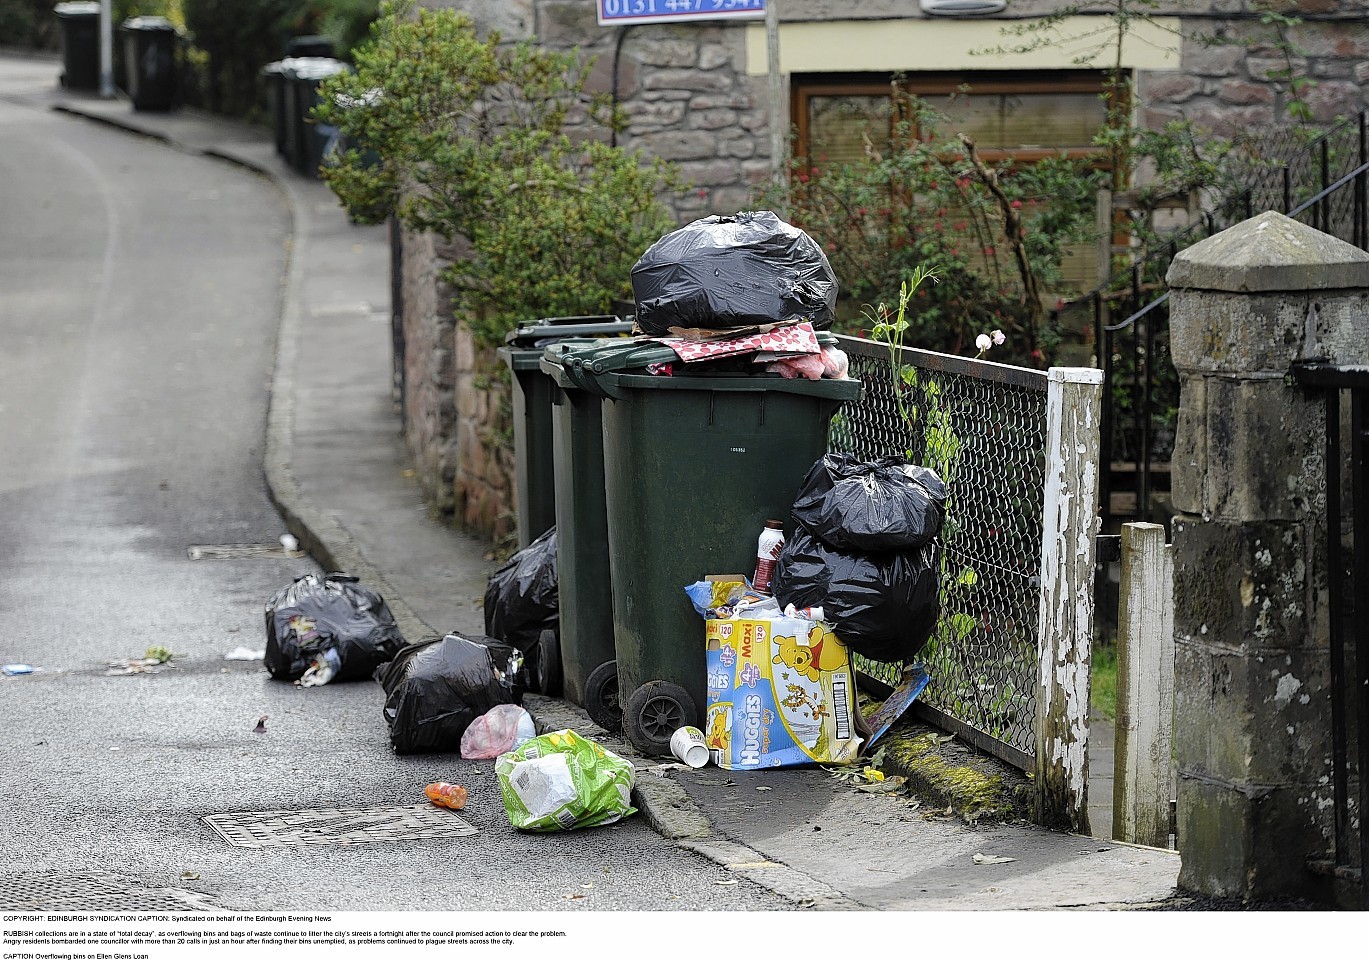 Bin collections could be shaken up